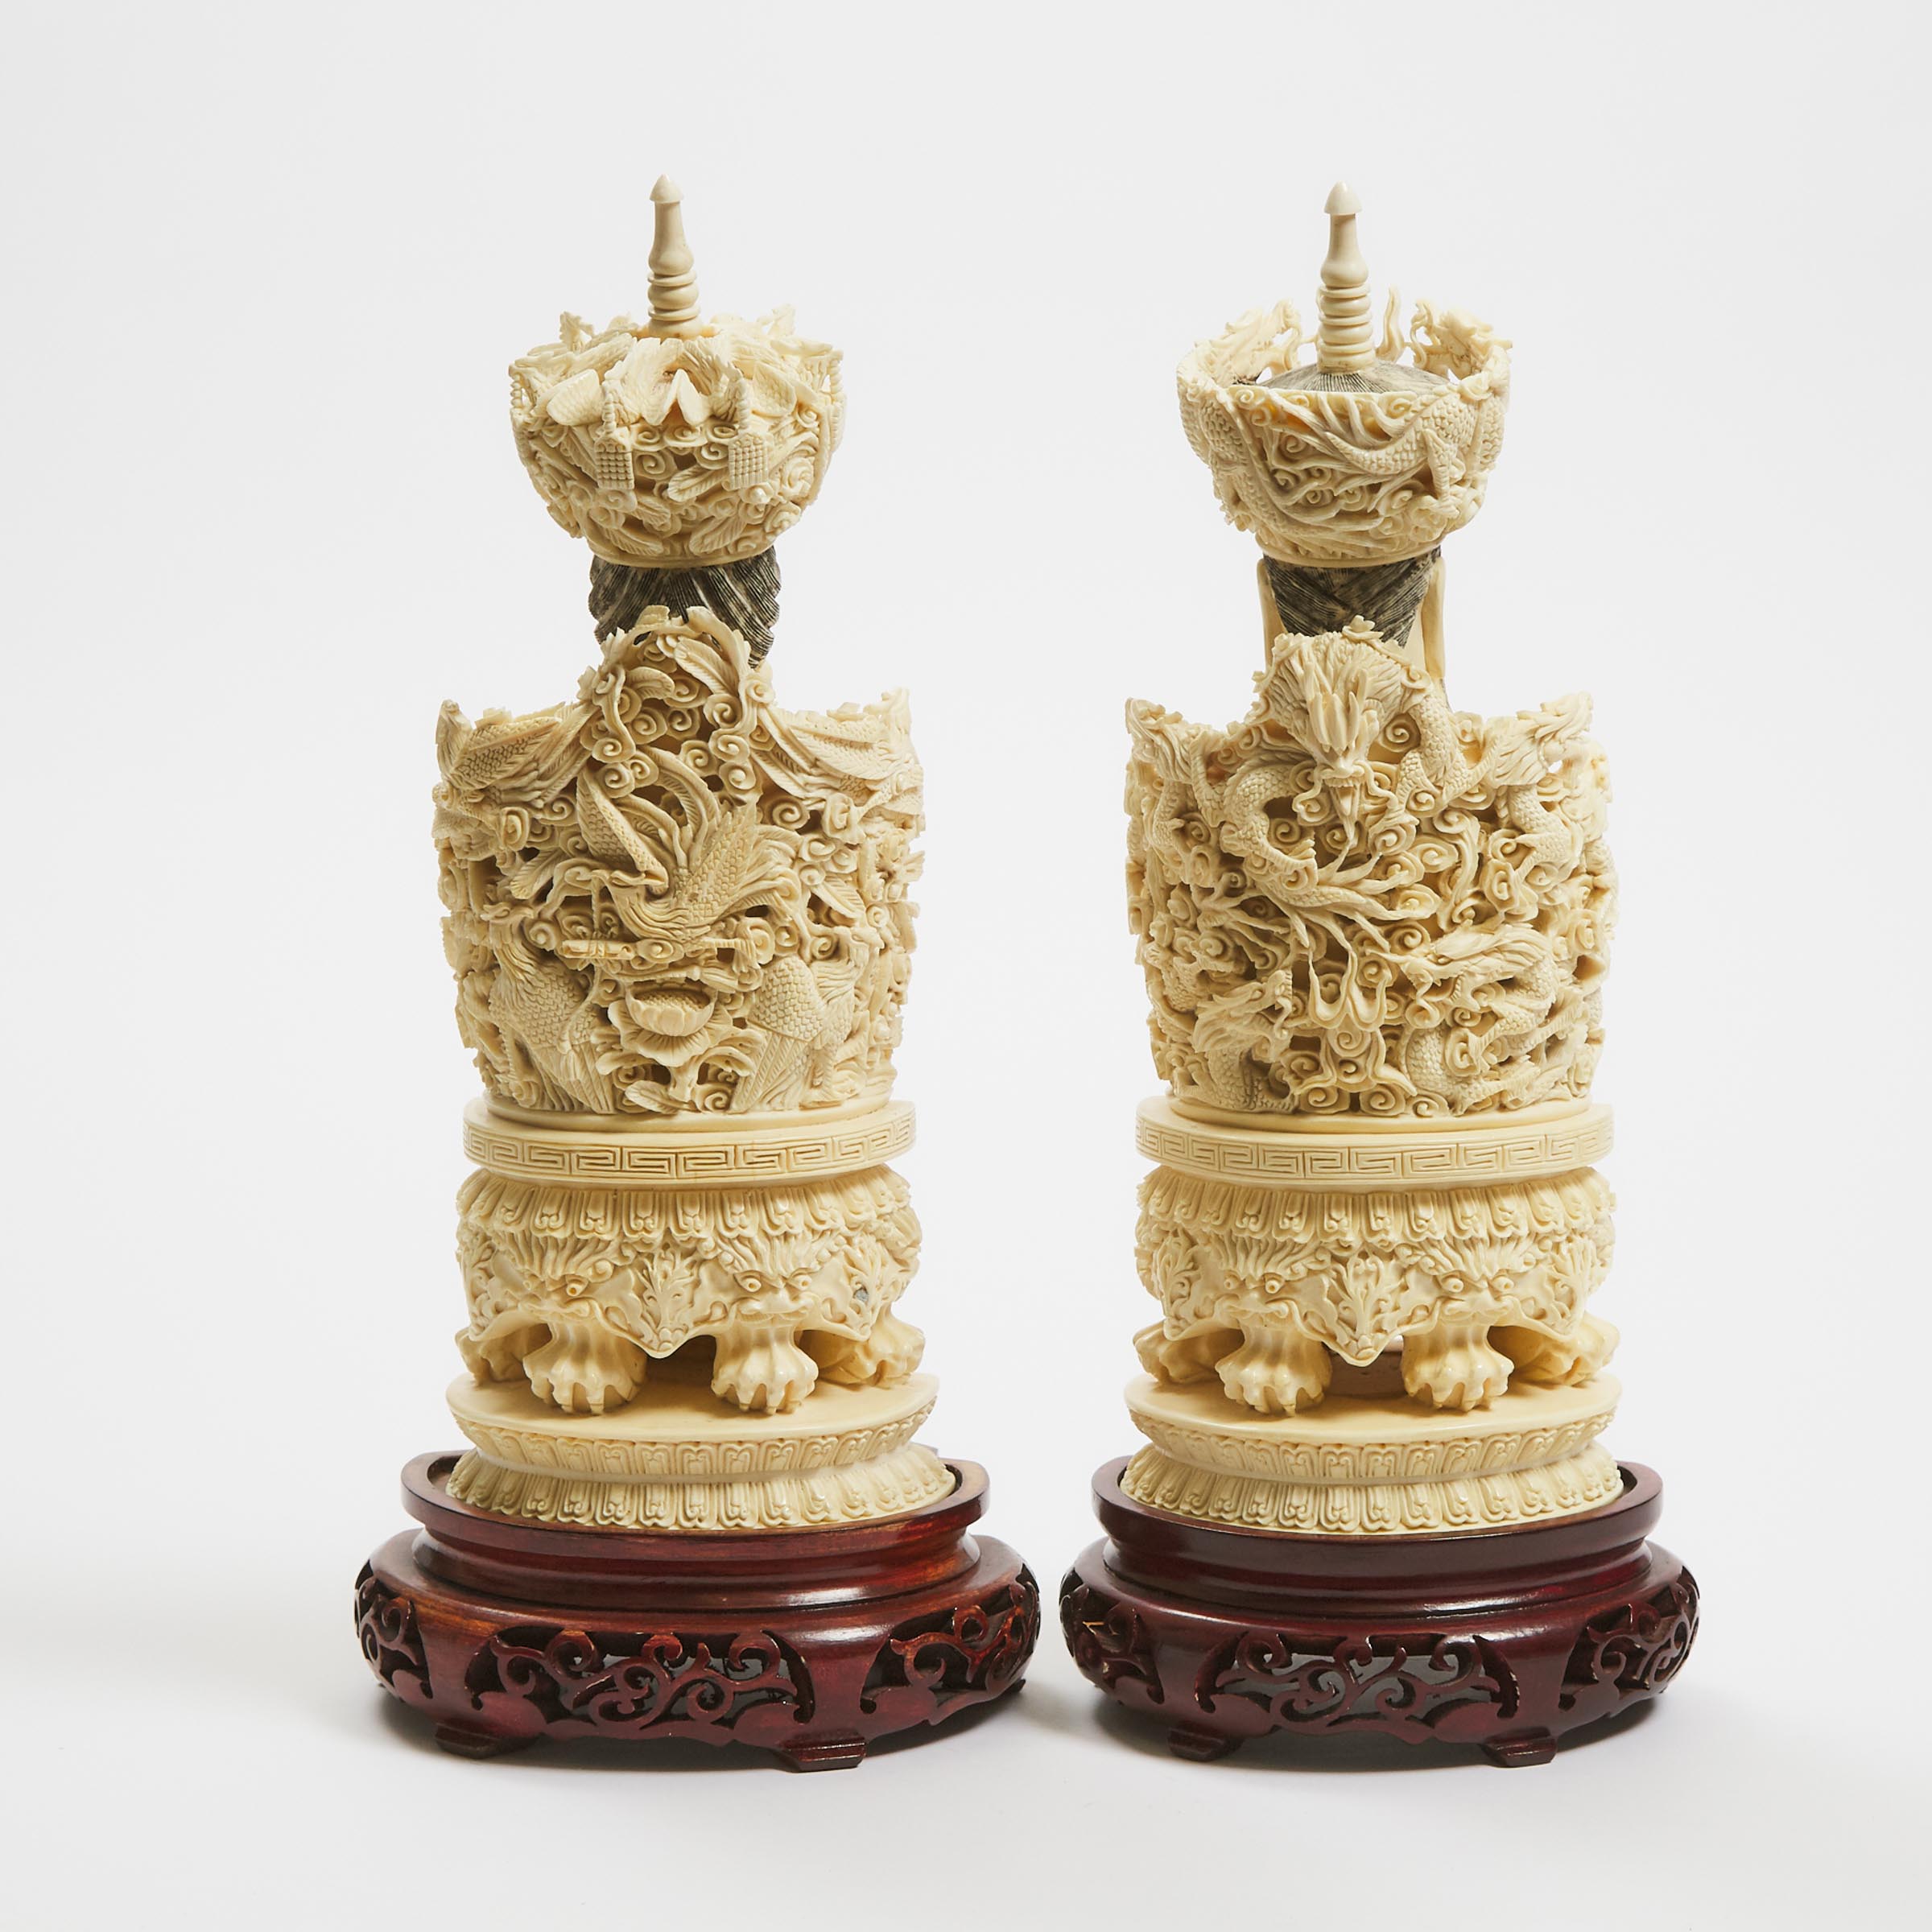 A Large Ivory Carved Emperor and Empress Pair, Mid 20th Century